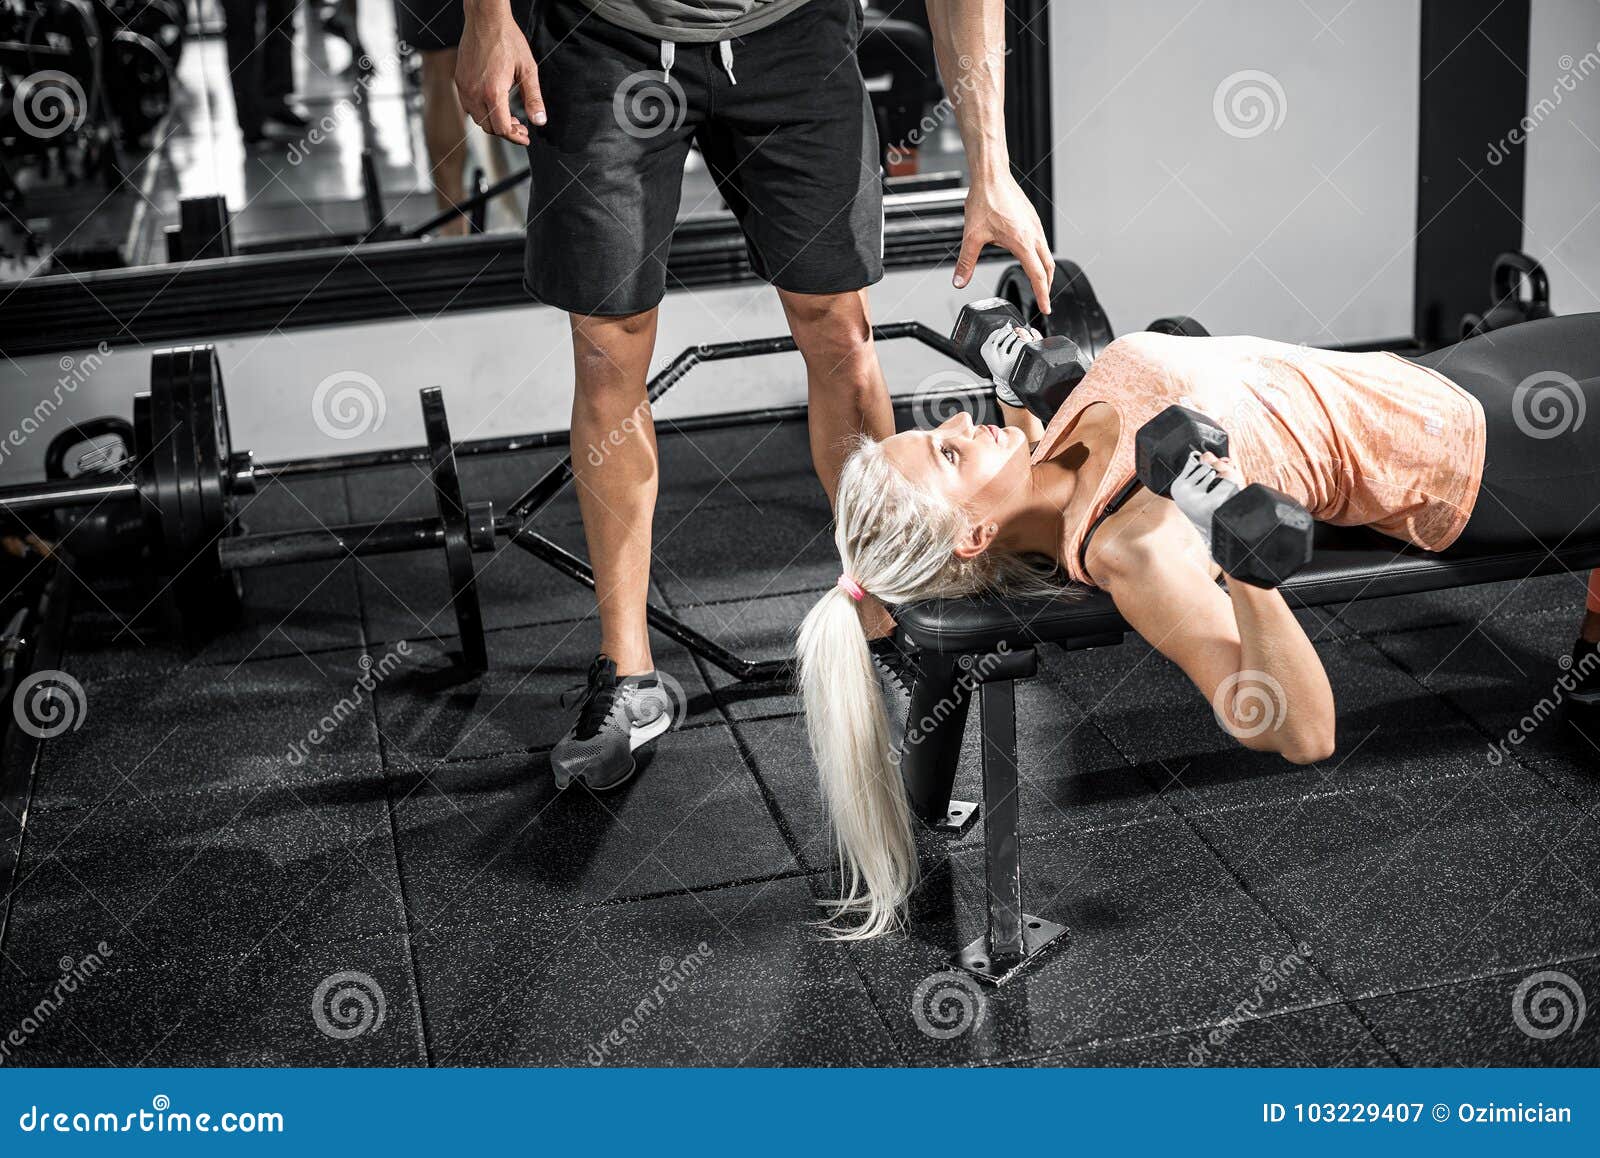 Female Dumbbell Chest Press with Help of Personal Trainer Stock Image -  Image of help, shape: 103229407